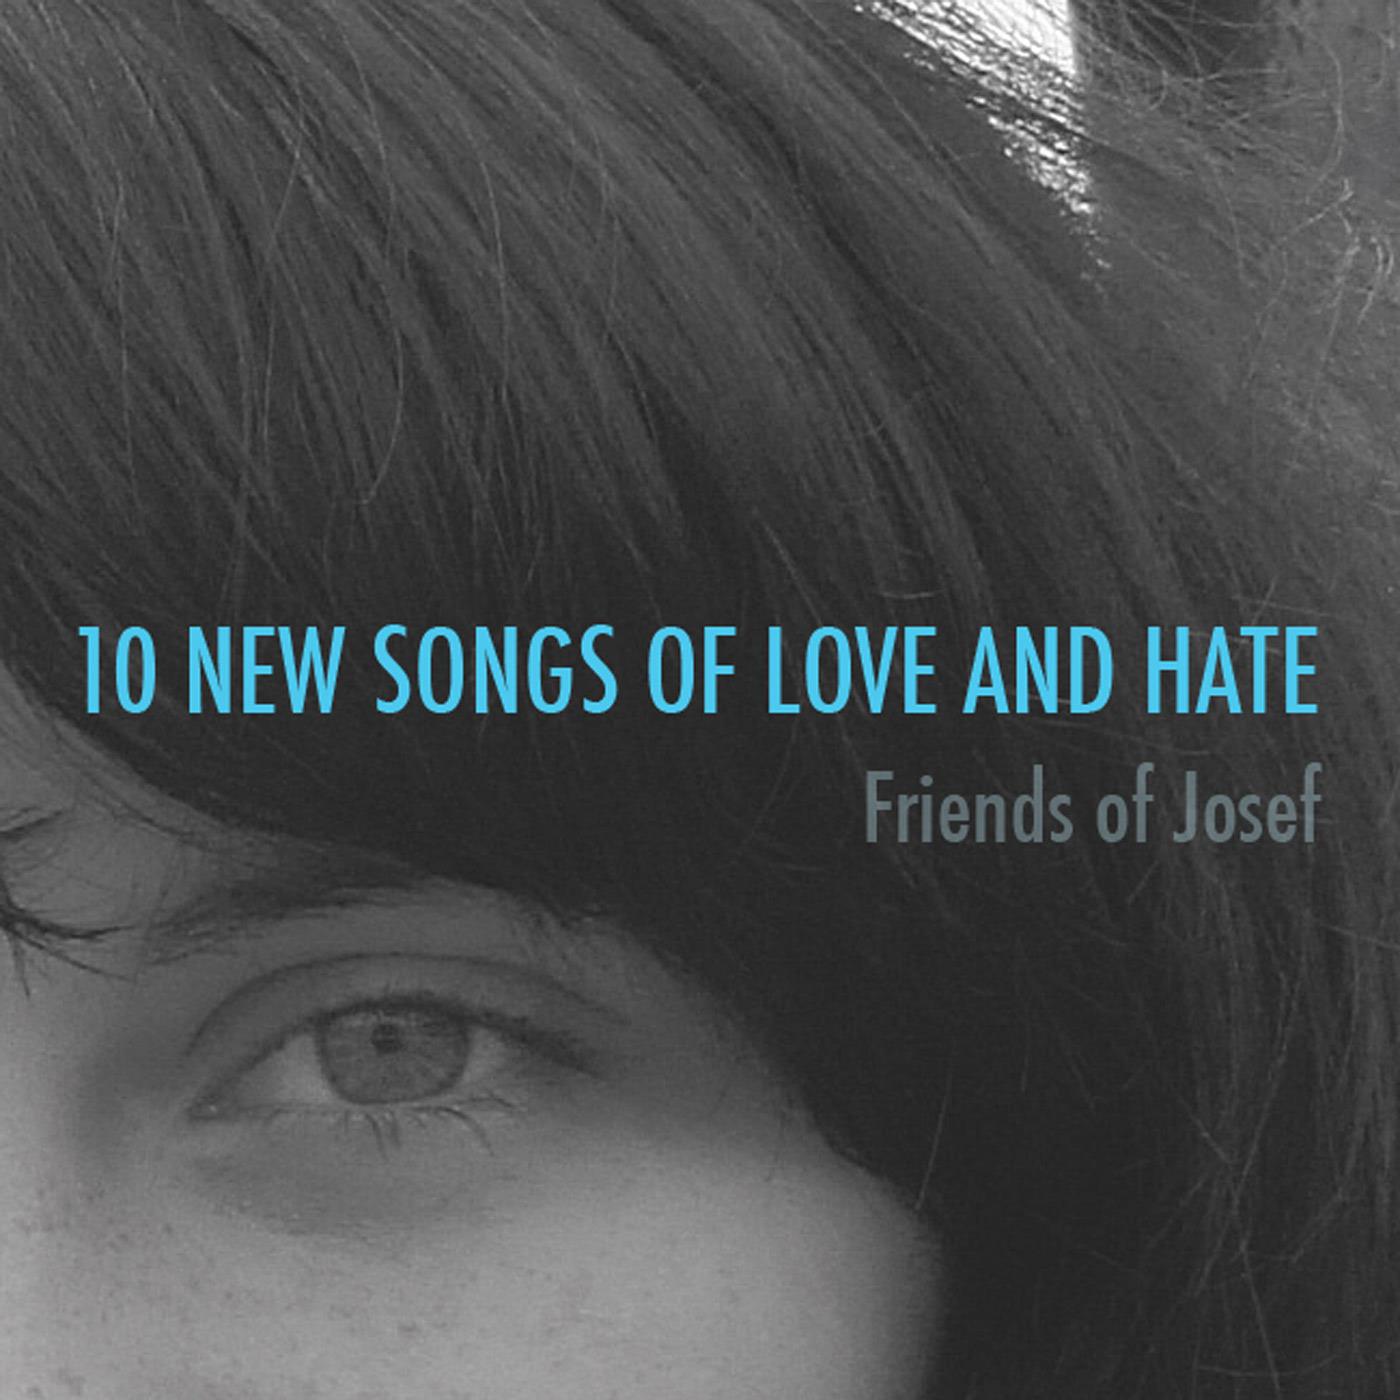 10 New Songs of Love and Hate